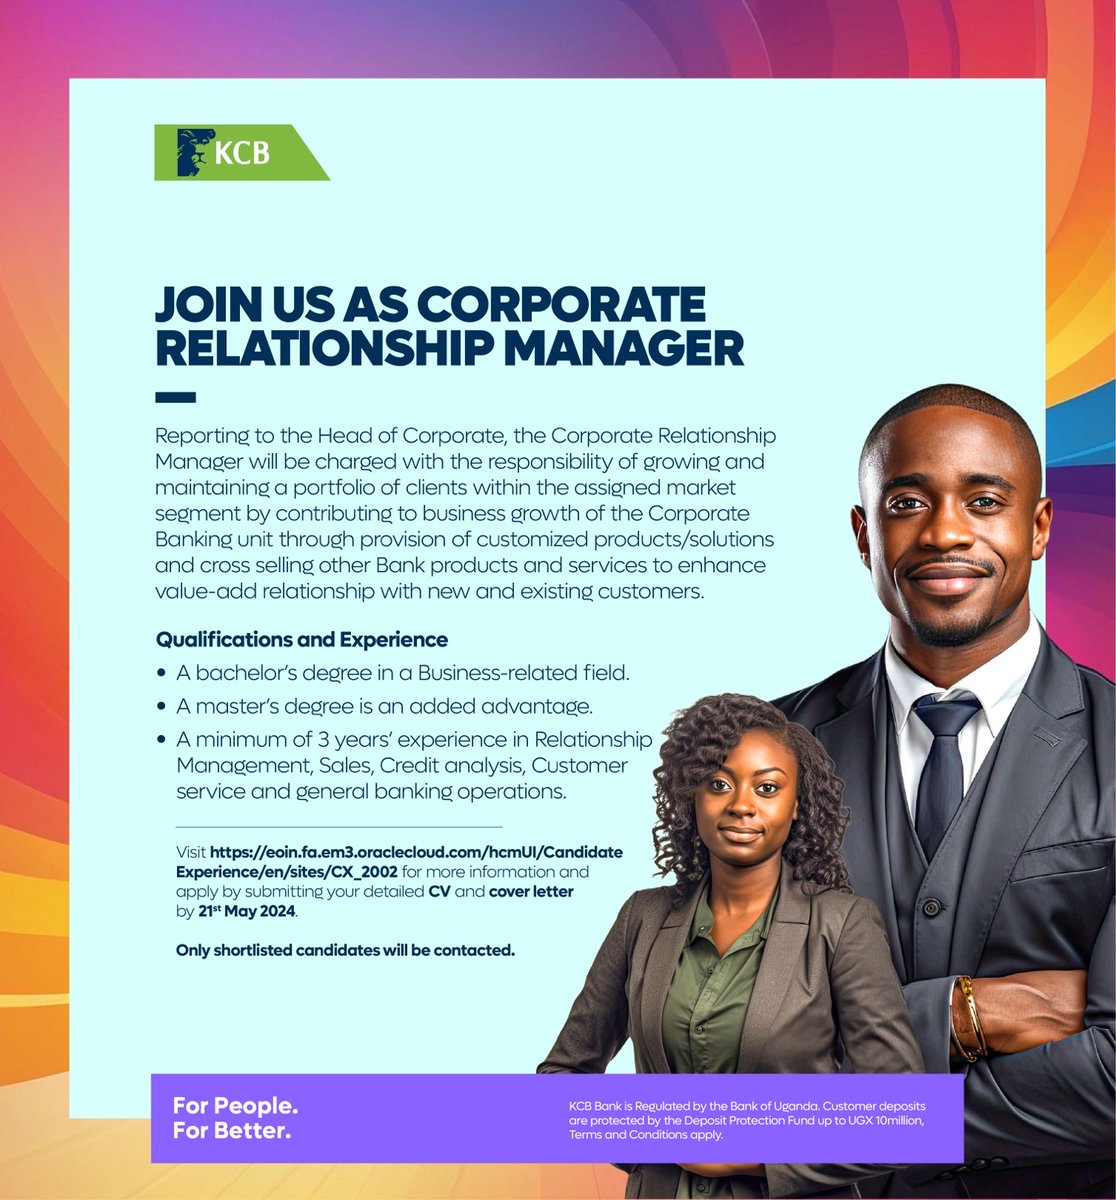 Join our team as a Corporate Relationship Manager and contribute to the business growth of the corporate banking unit 😎

Your opportunity to grow with us awaits.

Apply here: bit.ly/48bQ5OJ 
#ForPeopleForBetter